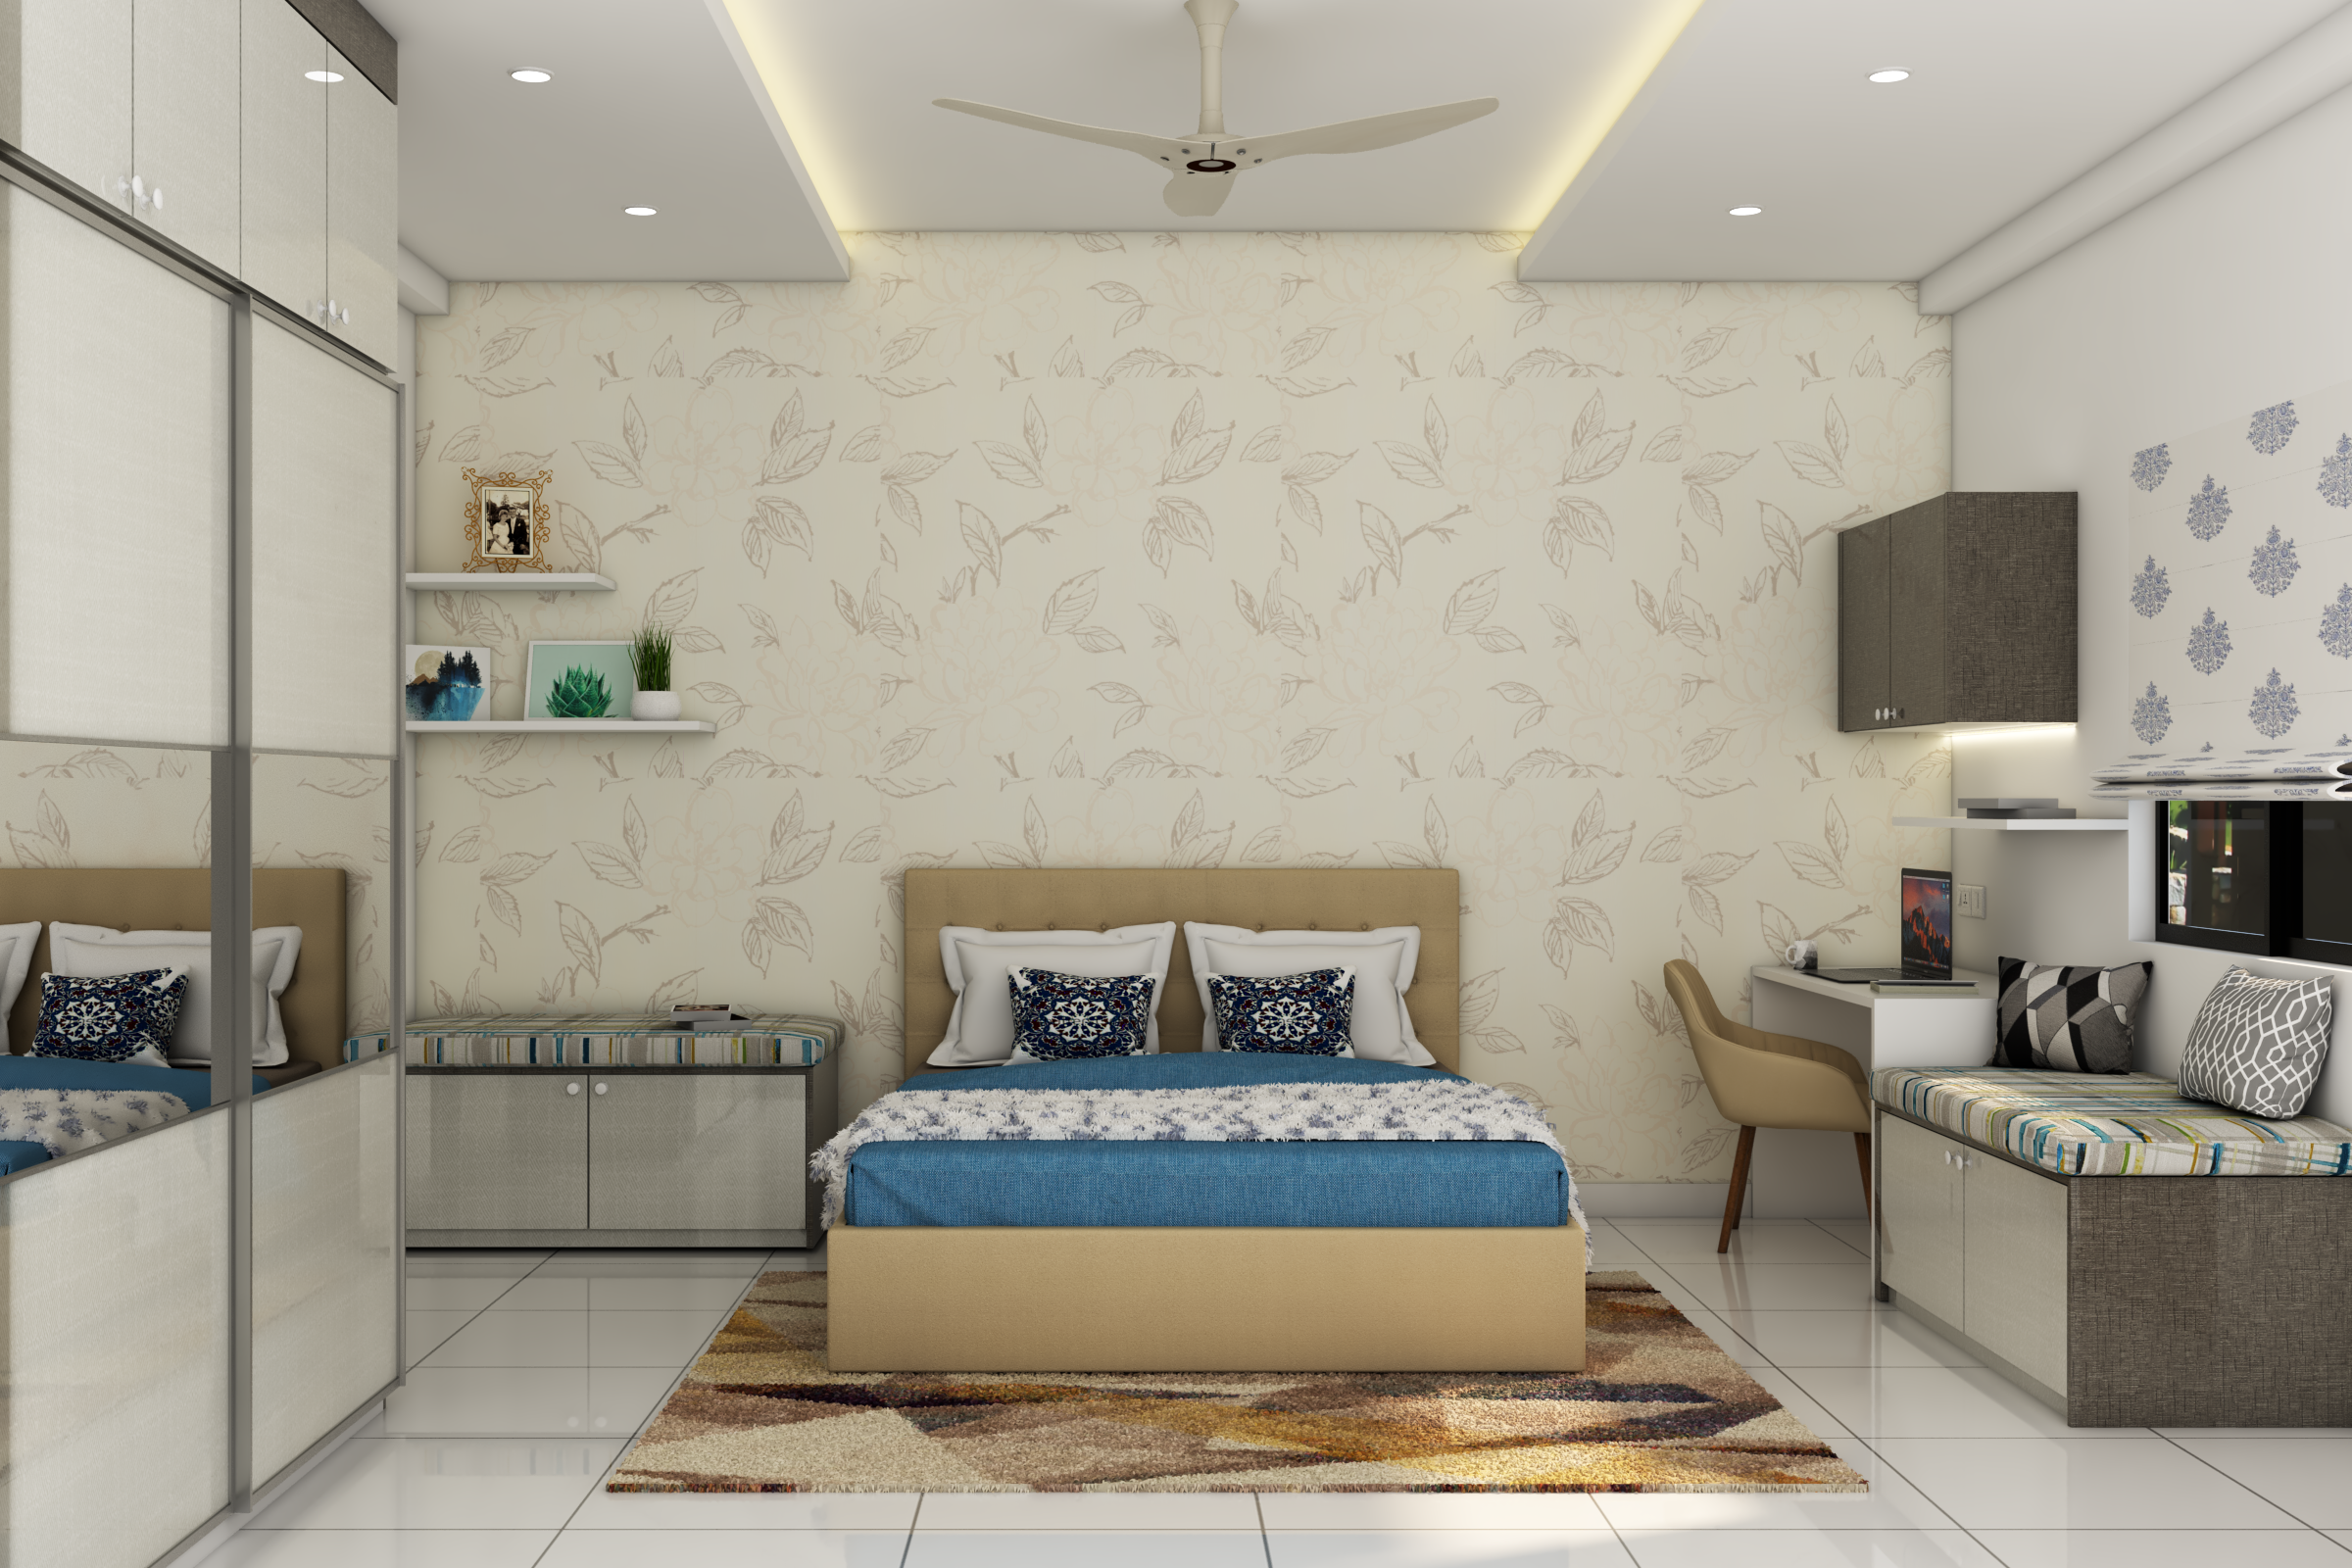 Contemporary Master Bedroom Design With Desk And Floral Wallpaper